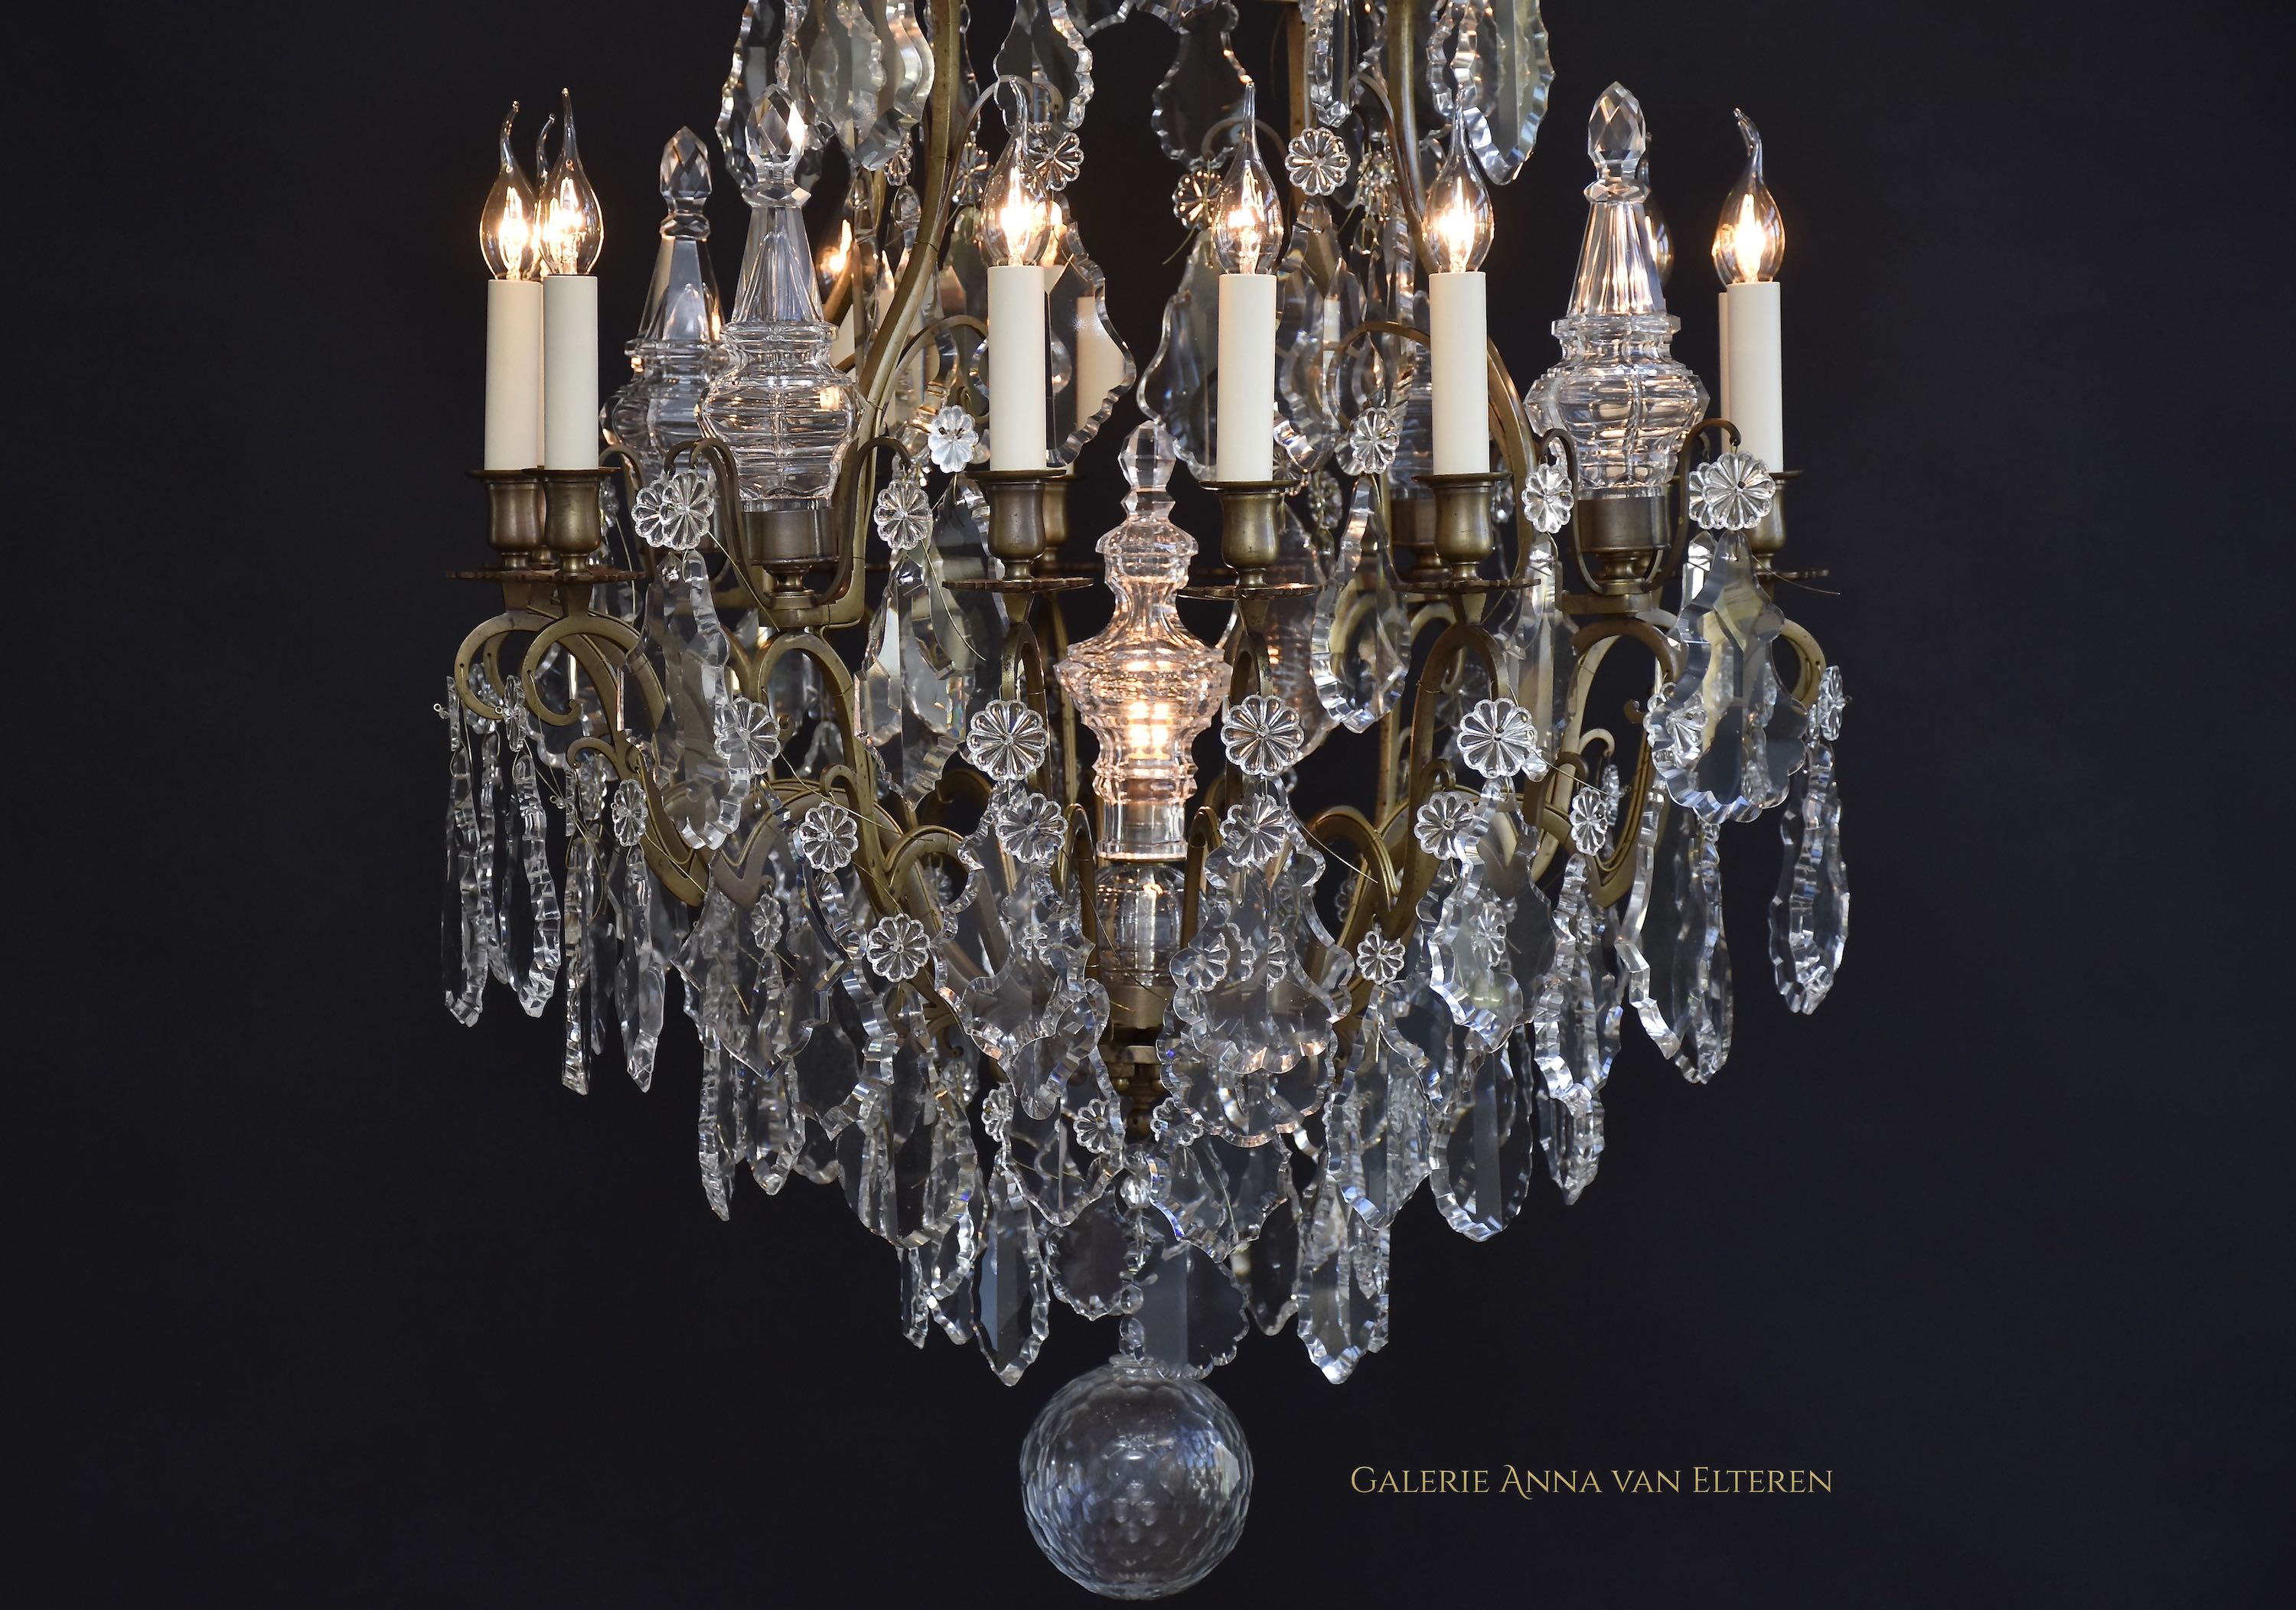 19th c. large French chandelier in the style of Louis XV